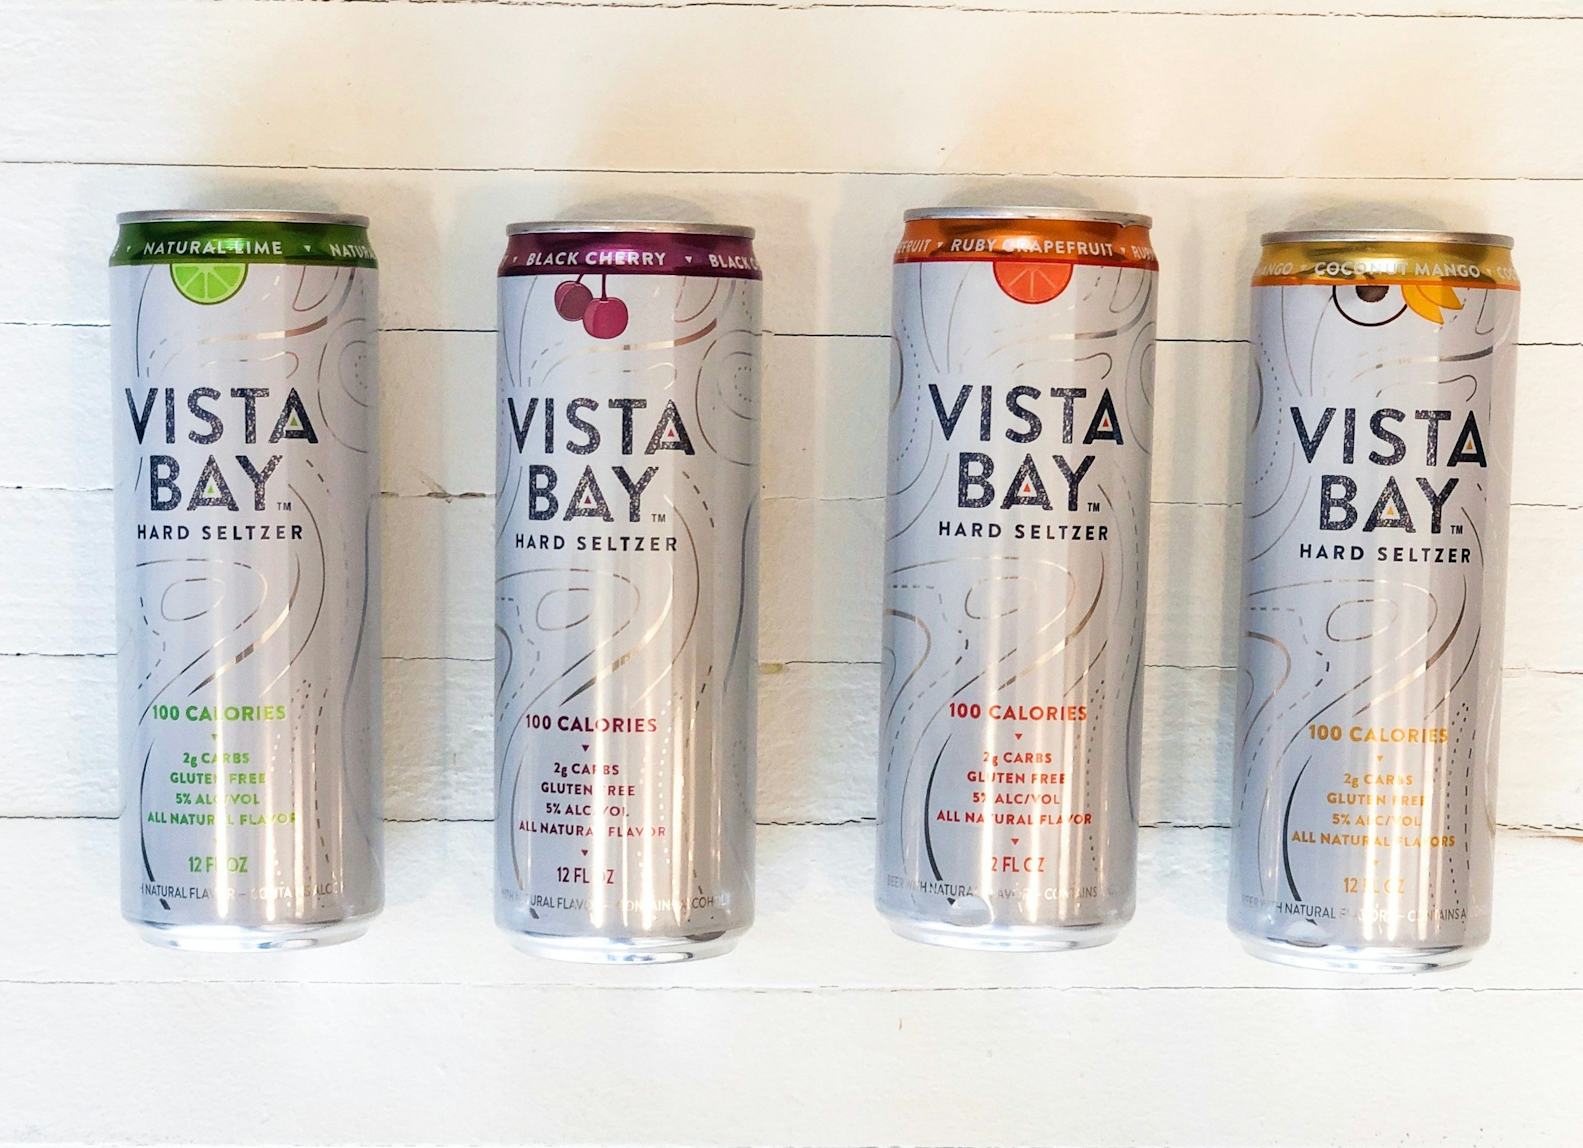 Aldi's New Vista Bay Hard Seltzers Will Come In 4 Refreshing Flavors